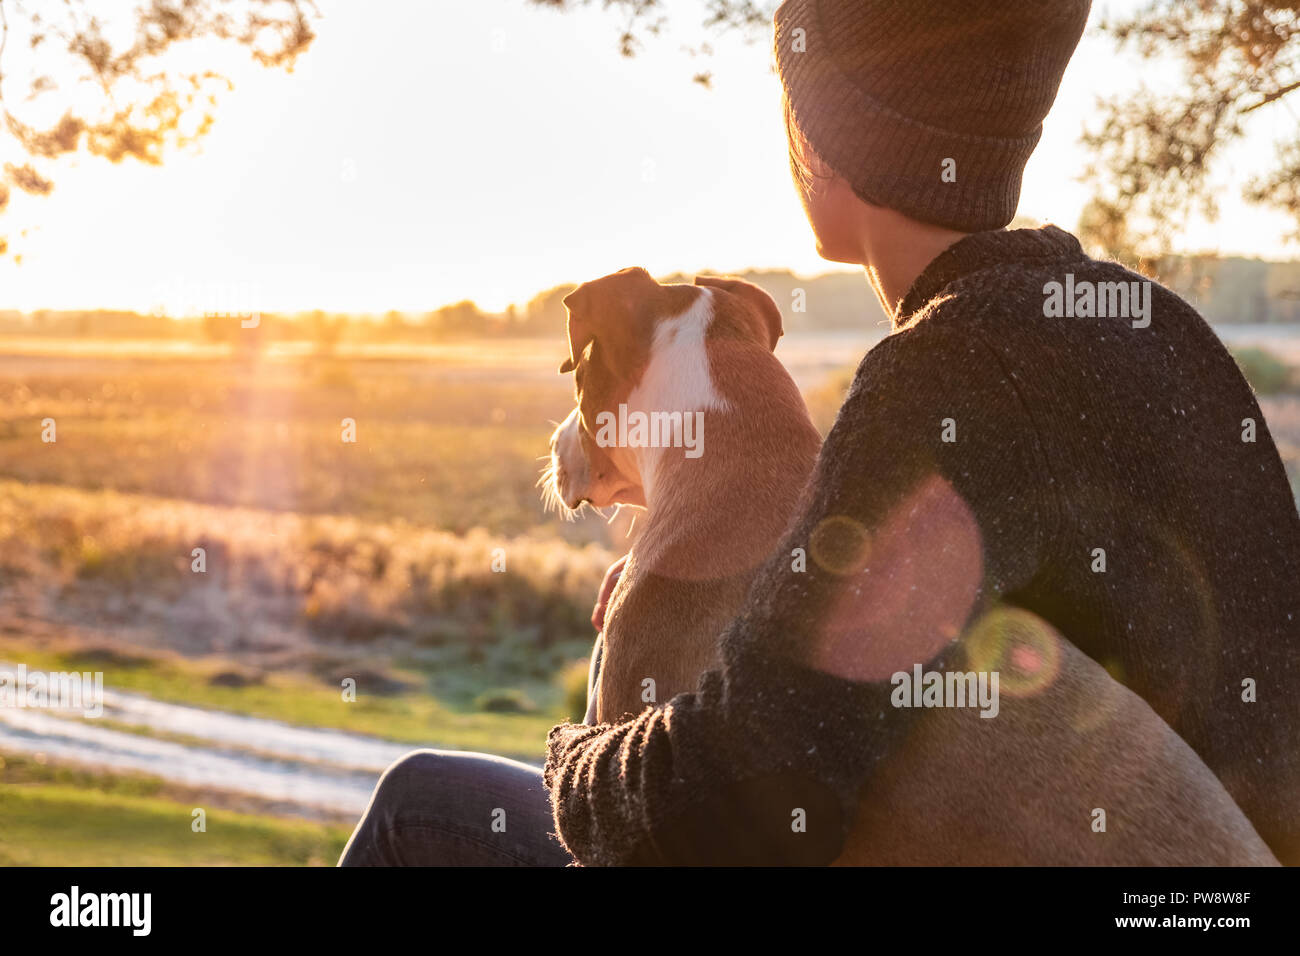 Hugging a dog in beautiful nature at sunset. Woman facing evening sun sits with her pet next to her and enjoys beauty of nature Stock Photo